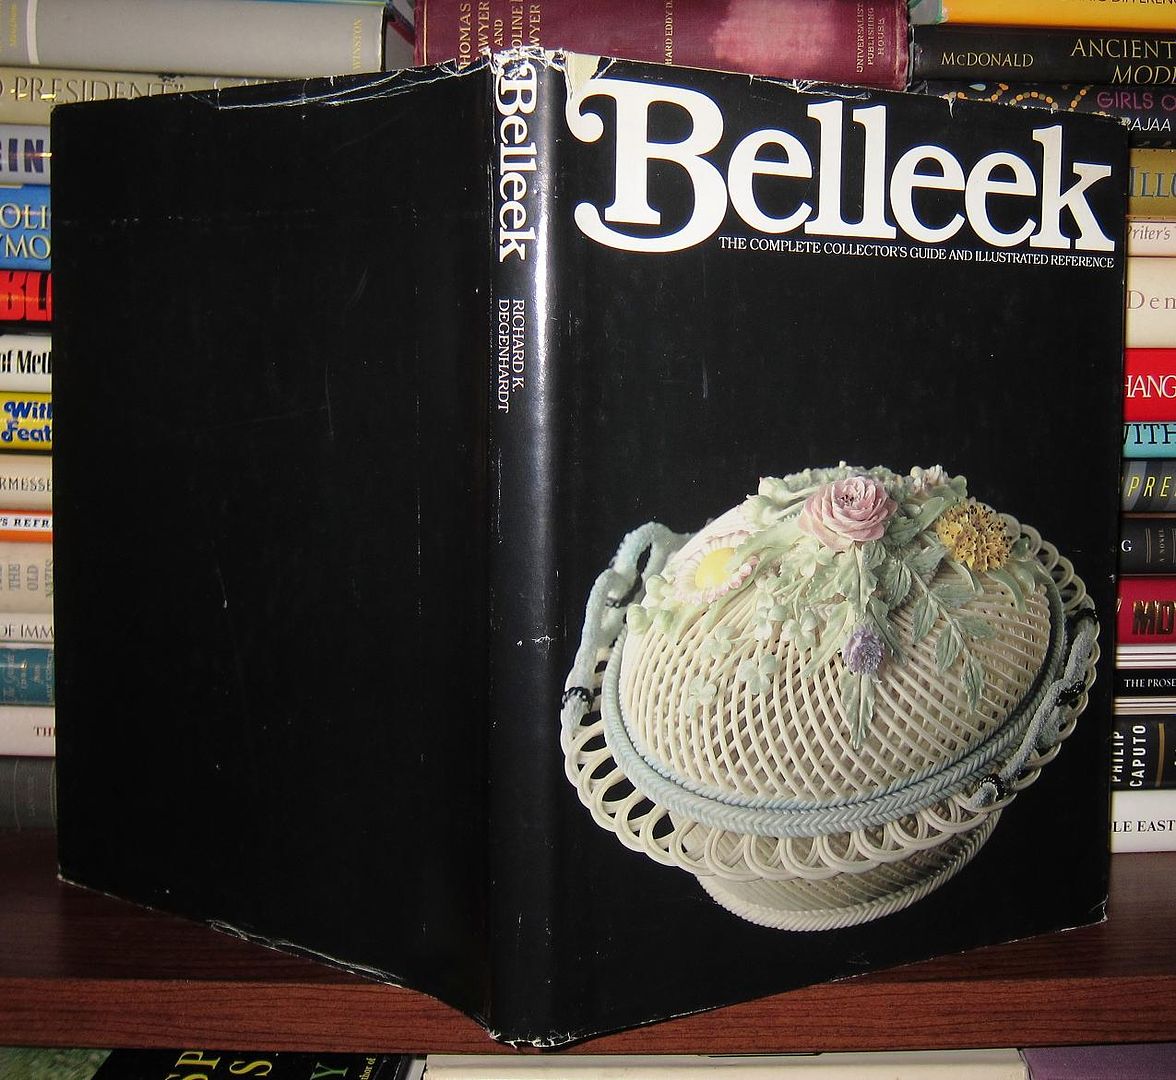 DEGENHARDT, RICHARD K. - Belleek the Complete Collector's Guide and Illustrated Reference